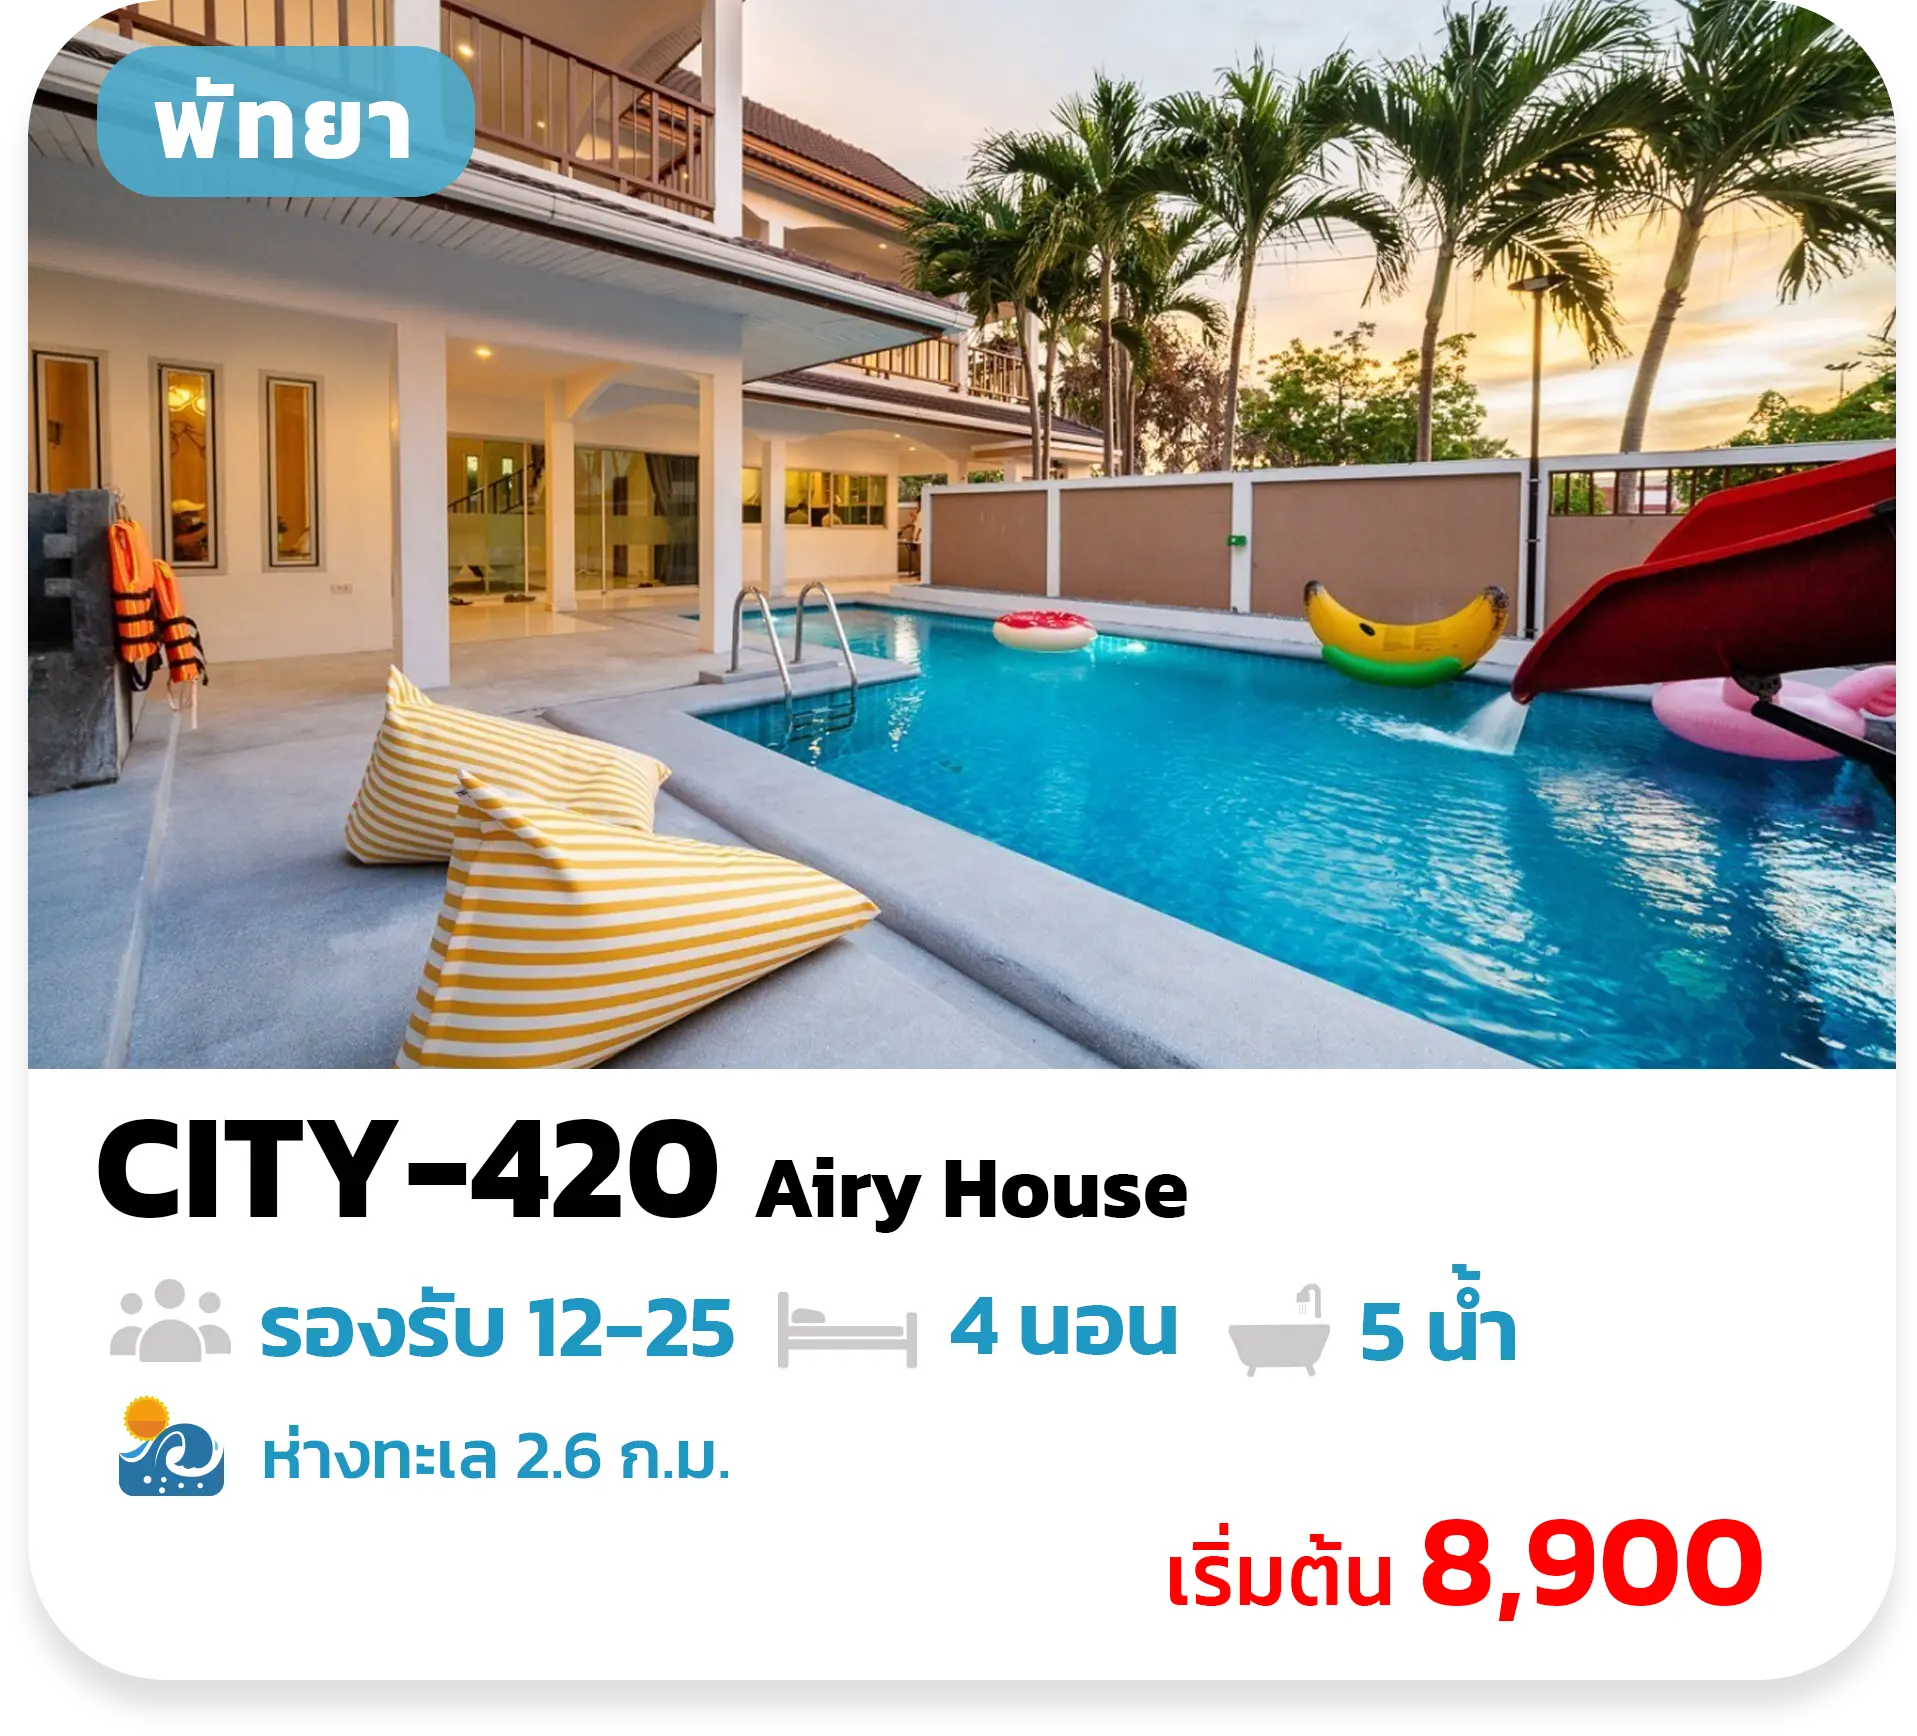 City-420 Airy House